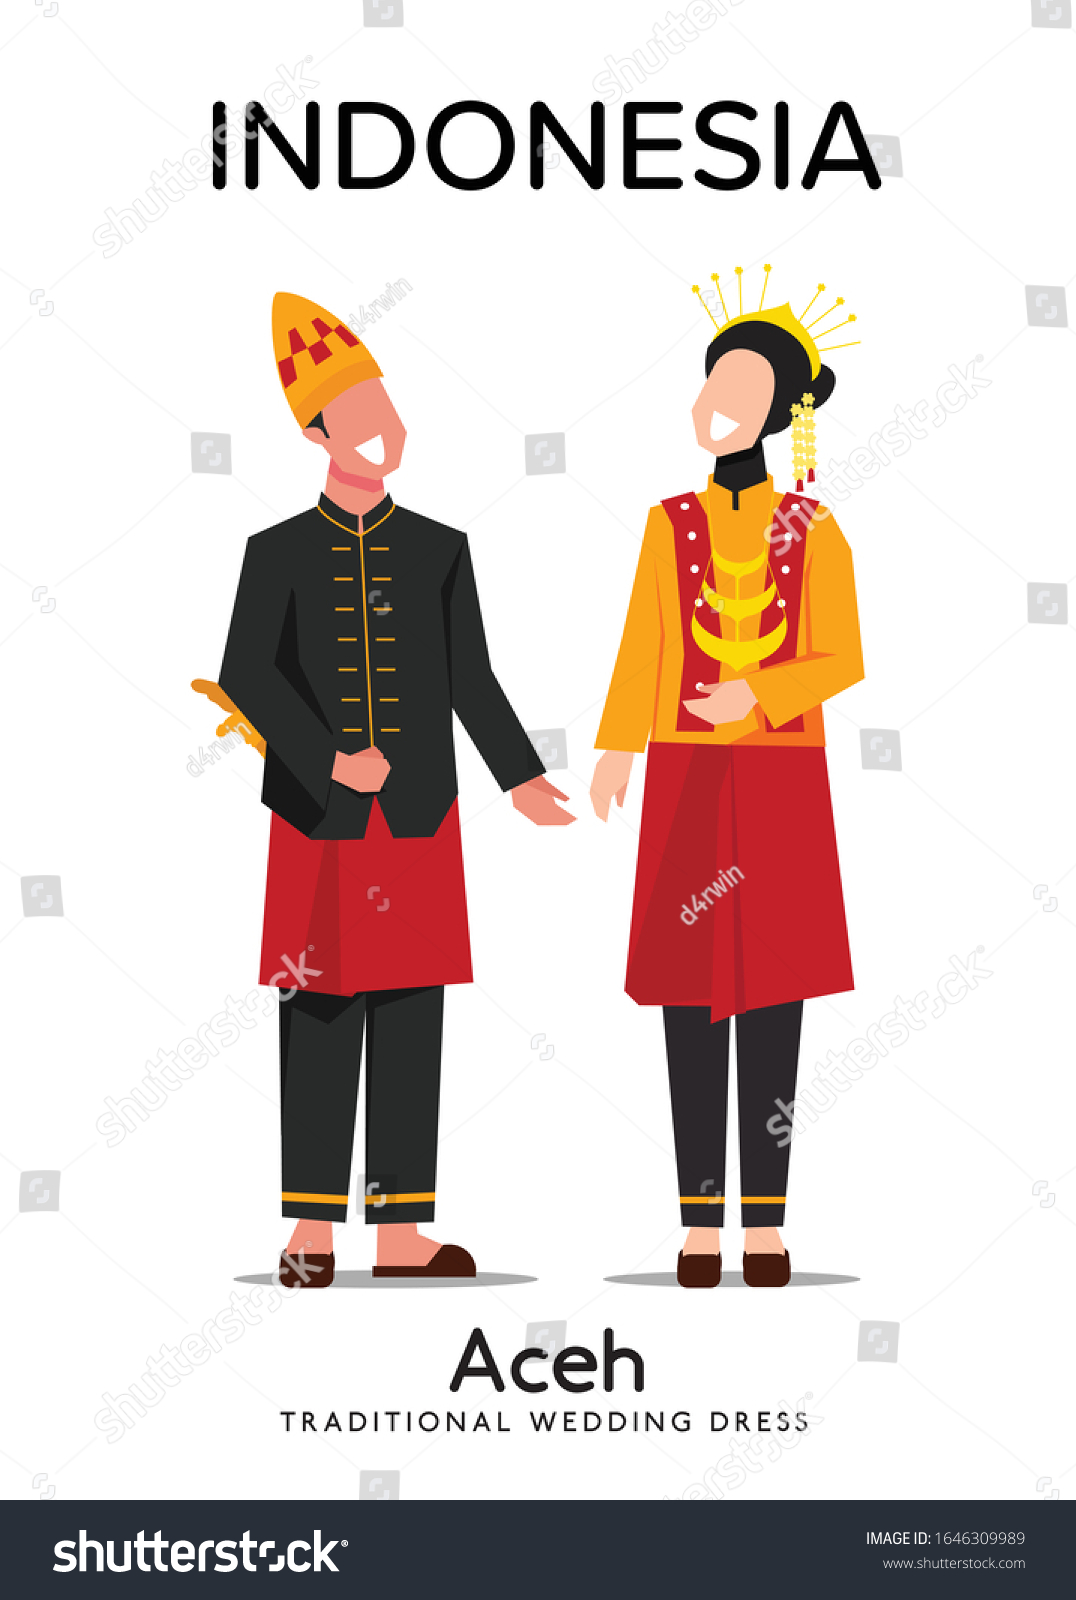 SVG of Beautiful Aceh Man And Woman Wearing Traditional Dress, Aceh Couple Traditional Wedding Dress vector illustration flat design, Indonesian Traditional Dress, Indonesia heritage svg